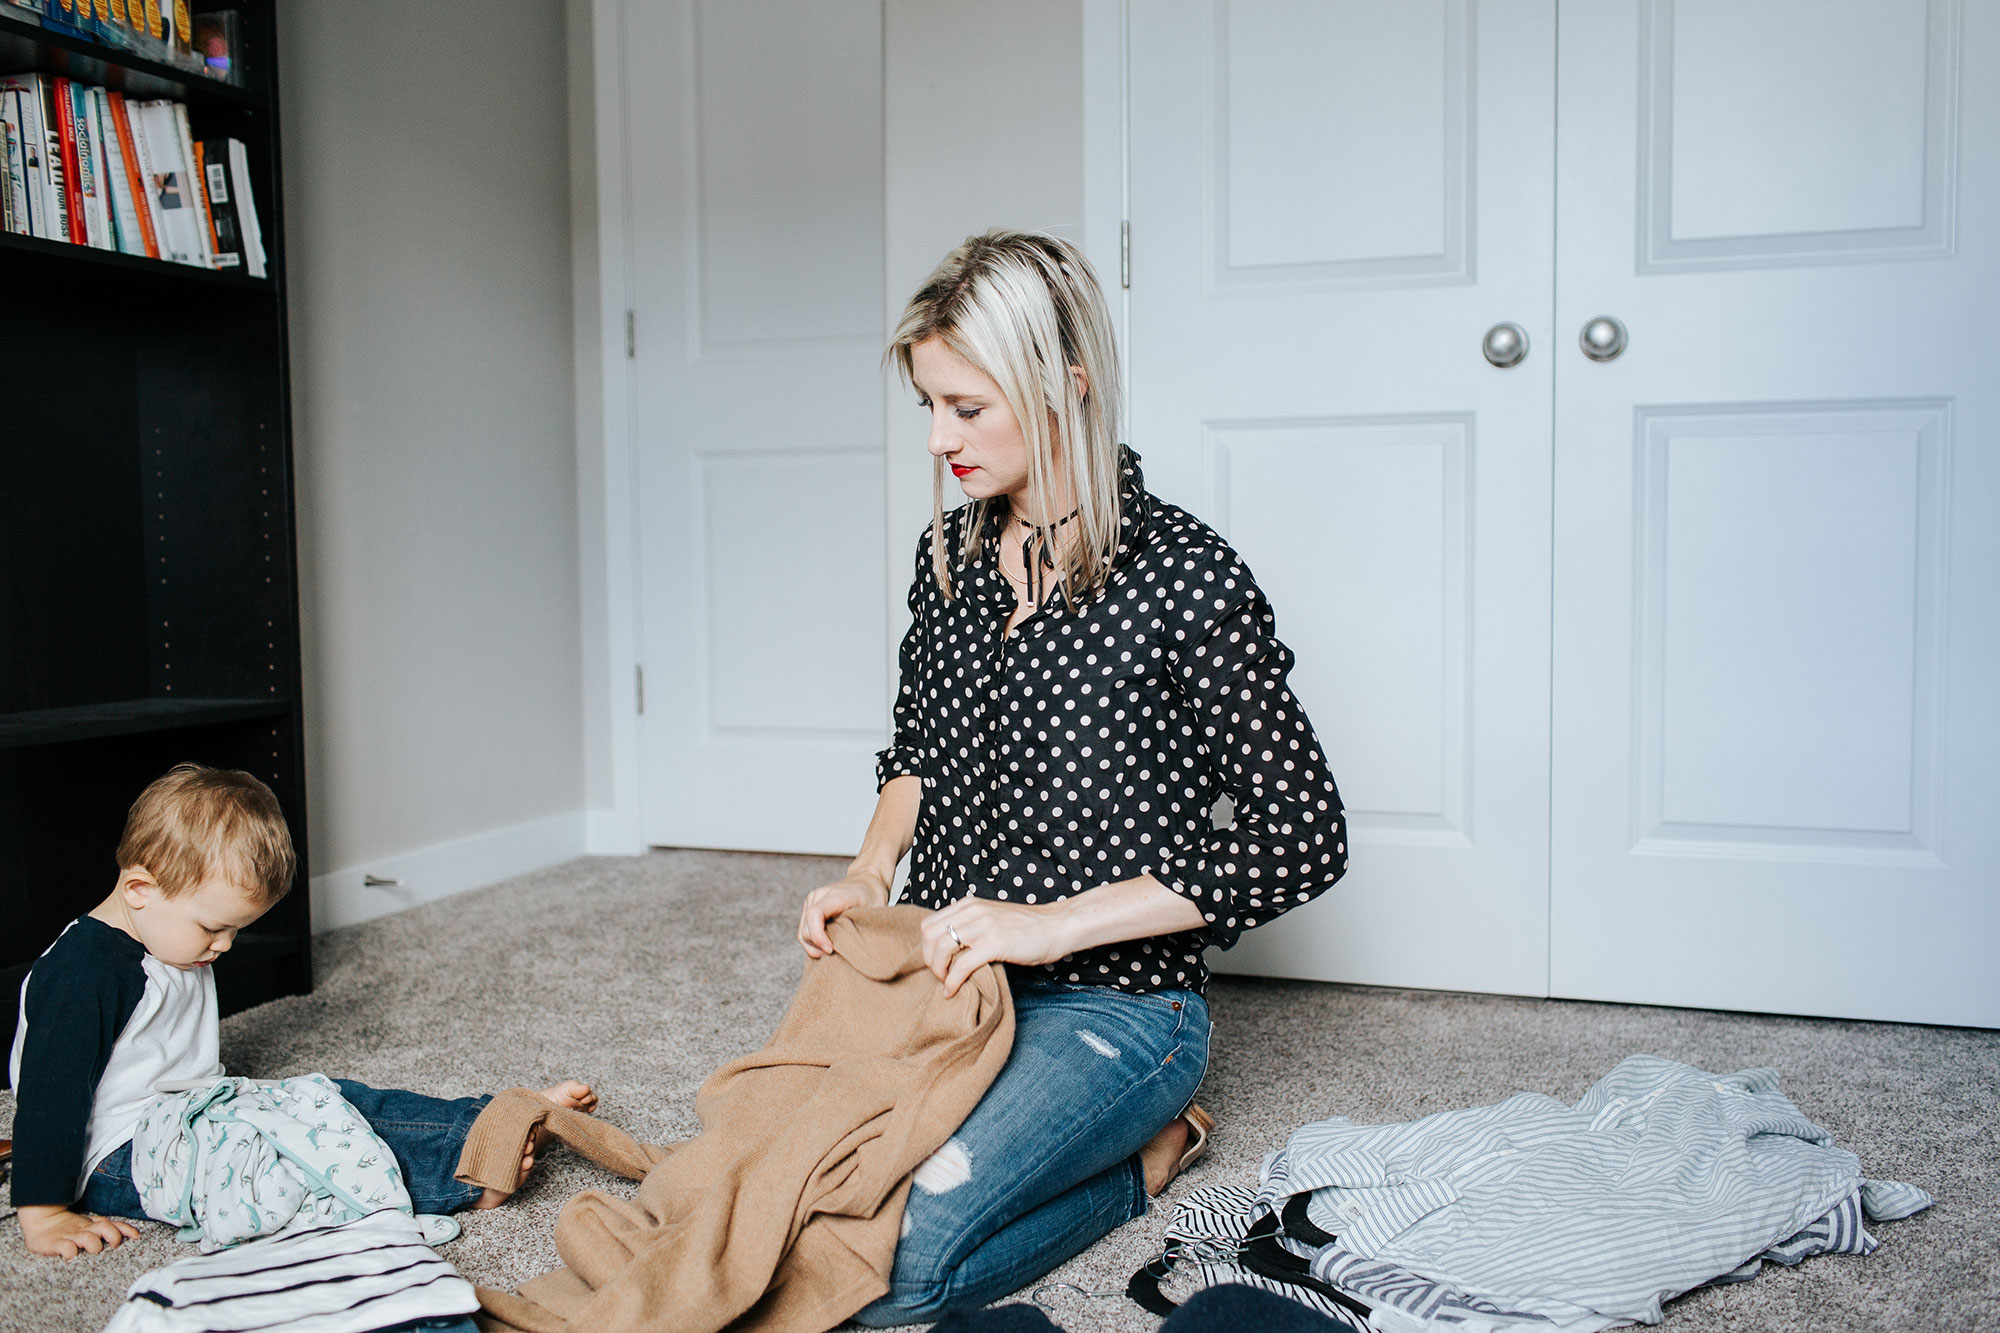 How to Let Go of Clothes You Never Wear + Find Your Most Authentic Personal Style | Little Miss Fearless